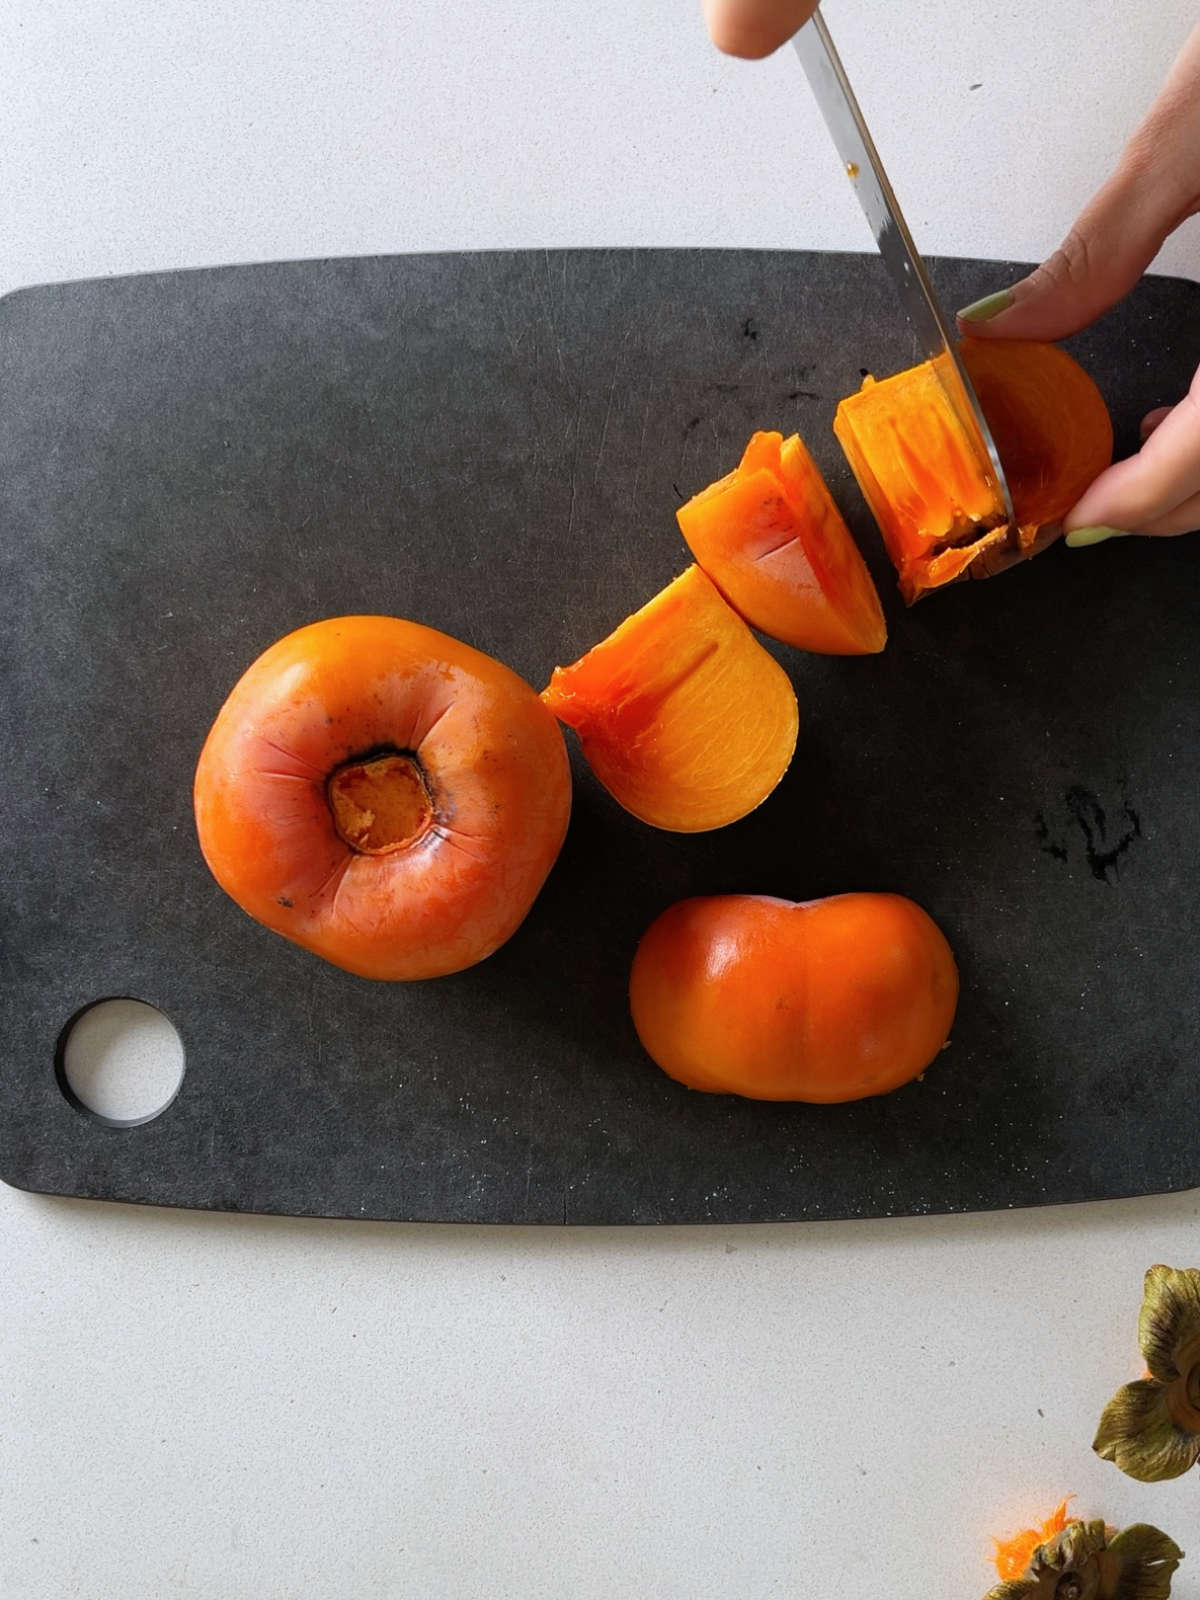 Cutting the center out of a Fuyu persimmon on a black cutting board.